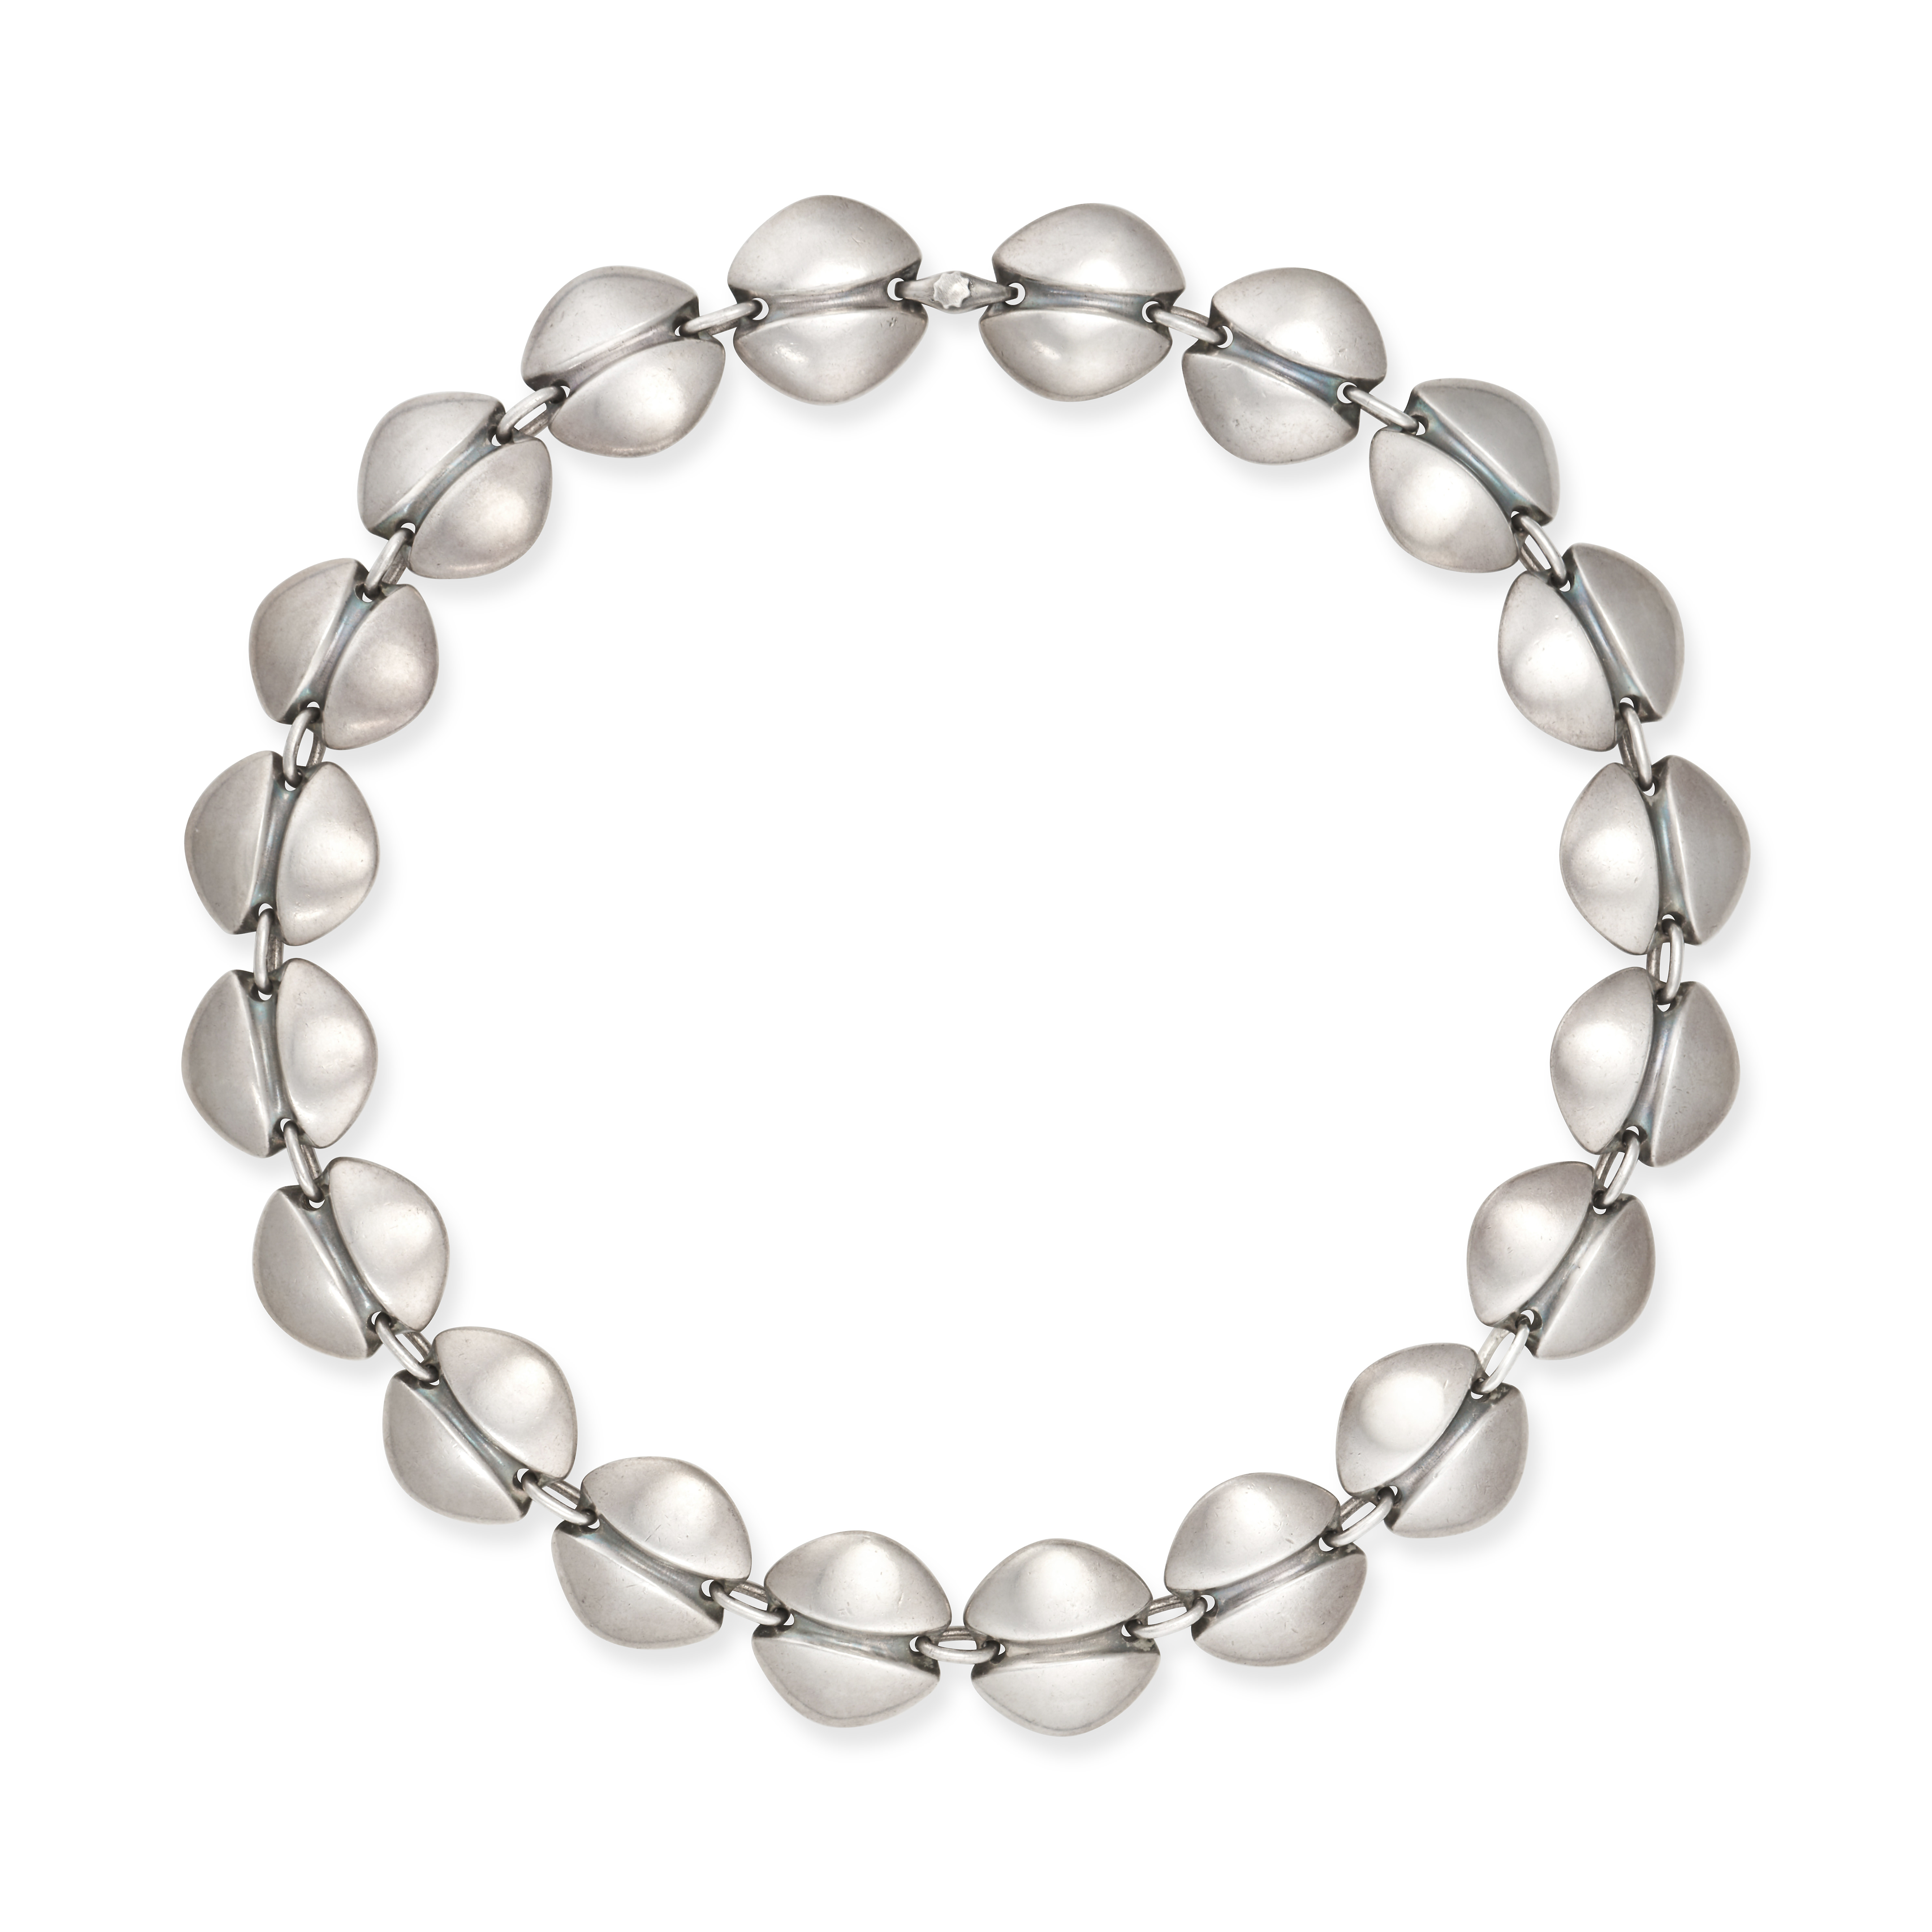 HENNING KOPPEL FOR GEORG JENSEN, A SILVER NECKLACE design number 270, comprising a row of stylise...